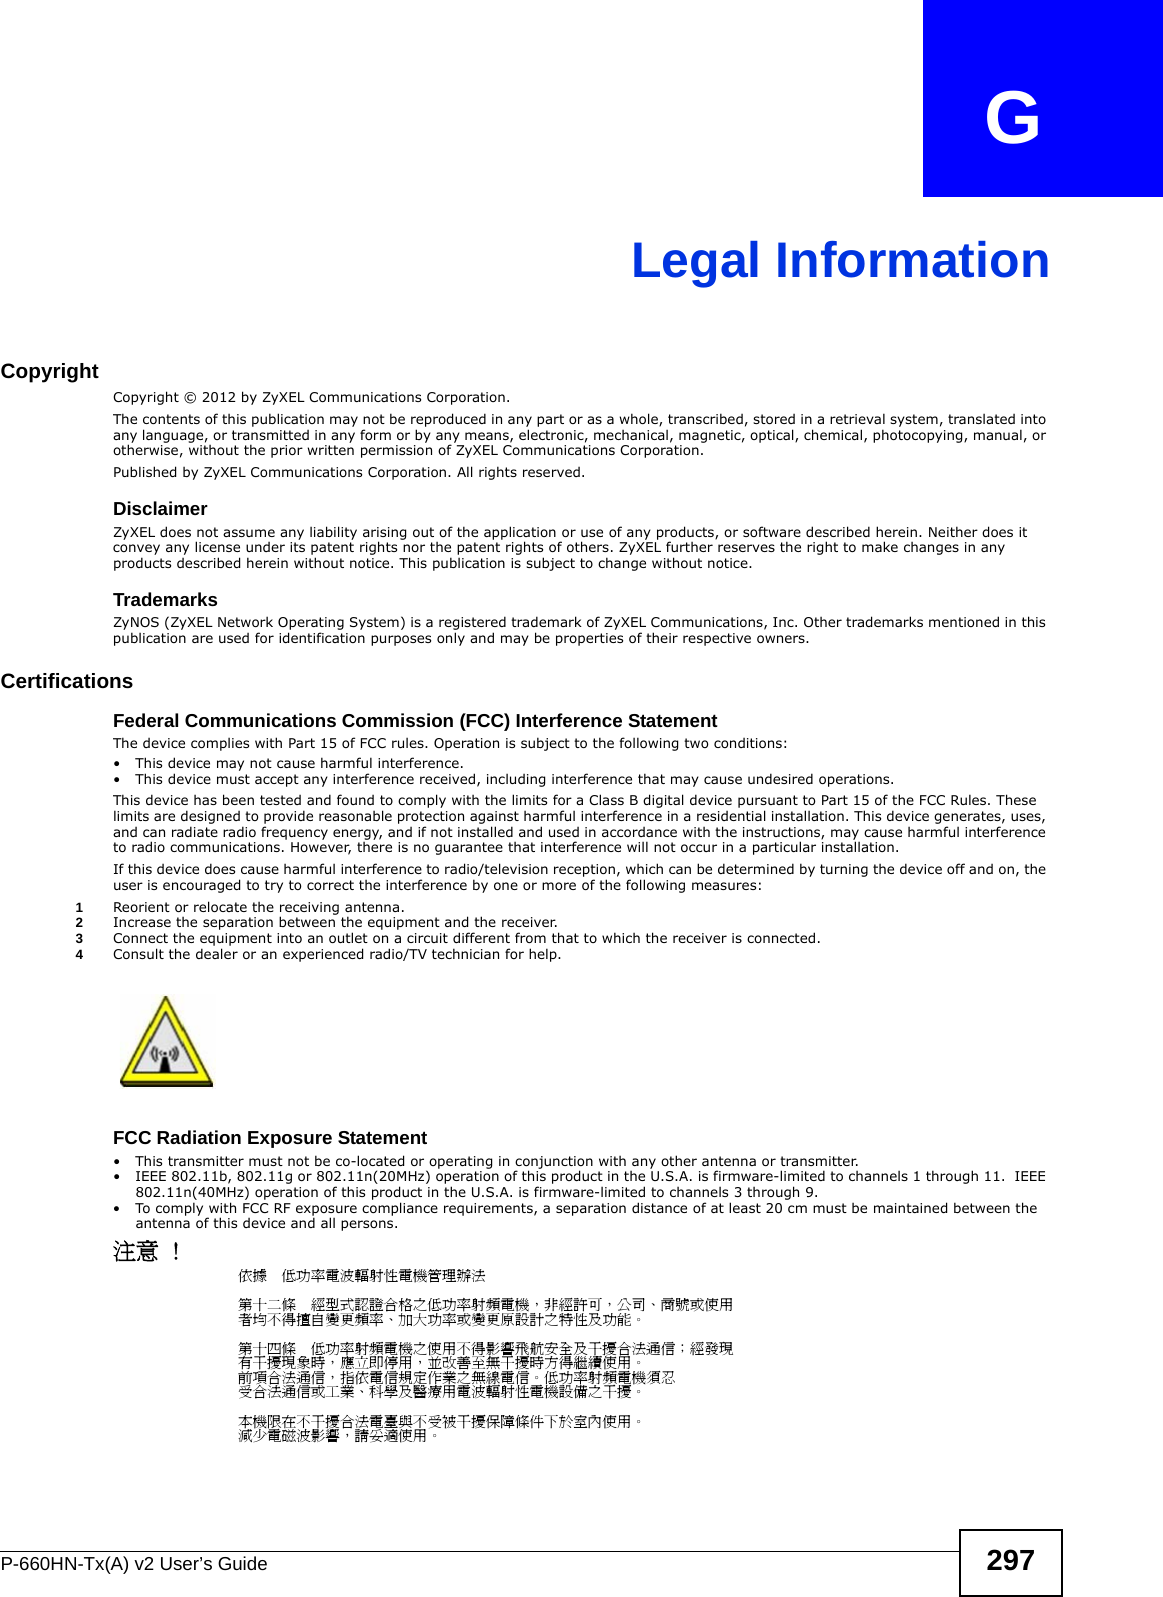 P-660HN-Tx(A) v2 User’s Guide 297APPENDIX   GLegal InformationCopyrightCopyright © 2012 by ZyXEL Communications Corporation.The contents of this publication may not be reproduced in any part or as a whole, transcribed, stored in a retrieval system, translated into any language, or transmitted in any form or by any means, electronic, mechanical, magnetic, optical, chemical, photocopying, manual, or otherwise, without the prior written permission of ZyXEL Communications Corporation.Published by ZyXEL Communications Corporation. All rights reserved.DisclaimerZyXEL does not assume any liability arising out of the application or use of any products, or software described herein. Neither does it convey any license under its patent rights nor the patent rights of others. ZyXEL further reserves the right to make changes in any products described herein without notice. This publication is subject to change without notice.TrademarksZyNOS (ZyXEL Network Operating System) is a registered trademark of ZyXEL Communications, Inc. Other trademarks mentioned in this publication are used for identification purposes only and may be properties of their respective owners.Certifications Federal Communications Commission (FCC) Interference StatementThe device complies with Part 15 of FCC rules. Operation is subject to the following two conditions:• This device may not cause harmful interference.• This device must accept any interference received, including interference that may cause undesired operations.This device has been tested and found to comply with the limits for a Class B digital device pursuant to Part 15 of the FCC Rules. These limits are designed to provide reasonable protection against harmful interference in a residential installation. This device generates, uses, and can radiate radio frequency energy, and if not installed and used in accordance with the instructions, may cause harmful interference to radio communications. However, there is no guarantee that interference will not occur in a particular installation.If this device does cause harmful interference to radio/television reception, which can be determined by turning the device off and on, the user is encouraged to try to correct the interference by one or more of the following measures:1Reorient or relocate the receiving antenna.2Increase the separation between the equipment and the receiver.3Connect the equipment into an outlet on a circuit different from that to which the receiver is connected.4Consult the dealer or an experienced radio/TV technician for help.FCC Radiation Exposure Statement• This transmitter must not be co-located or operating in conjunction with any other antenna or transmitter. • IEEE 802.11b, 802.11g or 802.11n(20MHz) operation of this product in the U.S.A. is firmware-limited to channels 1 through 11.  IEEE 802.11n(40MHz) operation of this product in the U.S.A. is firmware-limited to channels 3 through 9. • To comply with FCC RF exposure compliance requirements, a separation distance of at least 20 cm must be maintained between the antenna of this device and all persons. 注意 ! 依據  低功率電波輻射性電機管理辦法第十二條  經型式認證合格之低功率射頻電機，非經許可，公司、商號或使用者均不得擅自變更頻率、加大功率或變更原設計之特性及功能。第十四條  低功率射頻電機之使用不得影響飛航安全及干擾合法通信；經發現有干擾現象時，應立即停用，並改善至無干擾時方得繼續使用。前項合法通信，指依電信規定作業之無線電信。低功率射頻電機須忍受合法通信或工業、科學及醫療用電波輻射性電機設備之干擾。 本機限在不干擾合法電臺與不受被干擾保障條件下於室內使用。 減少電磁波影響，請妥適使用。 